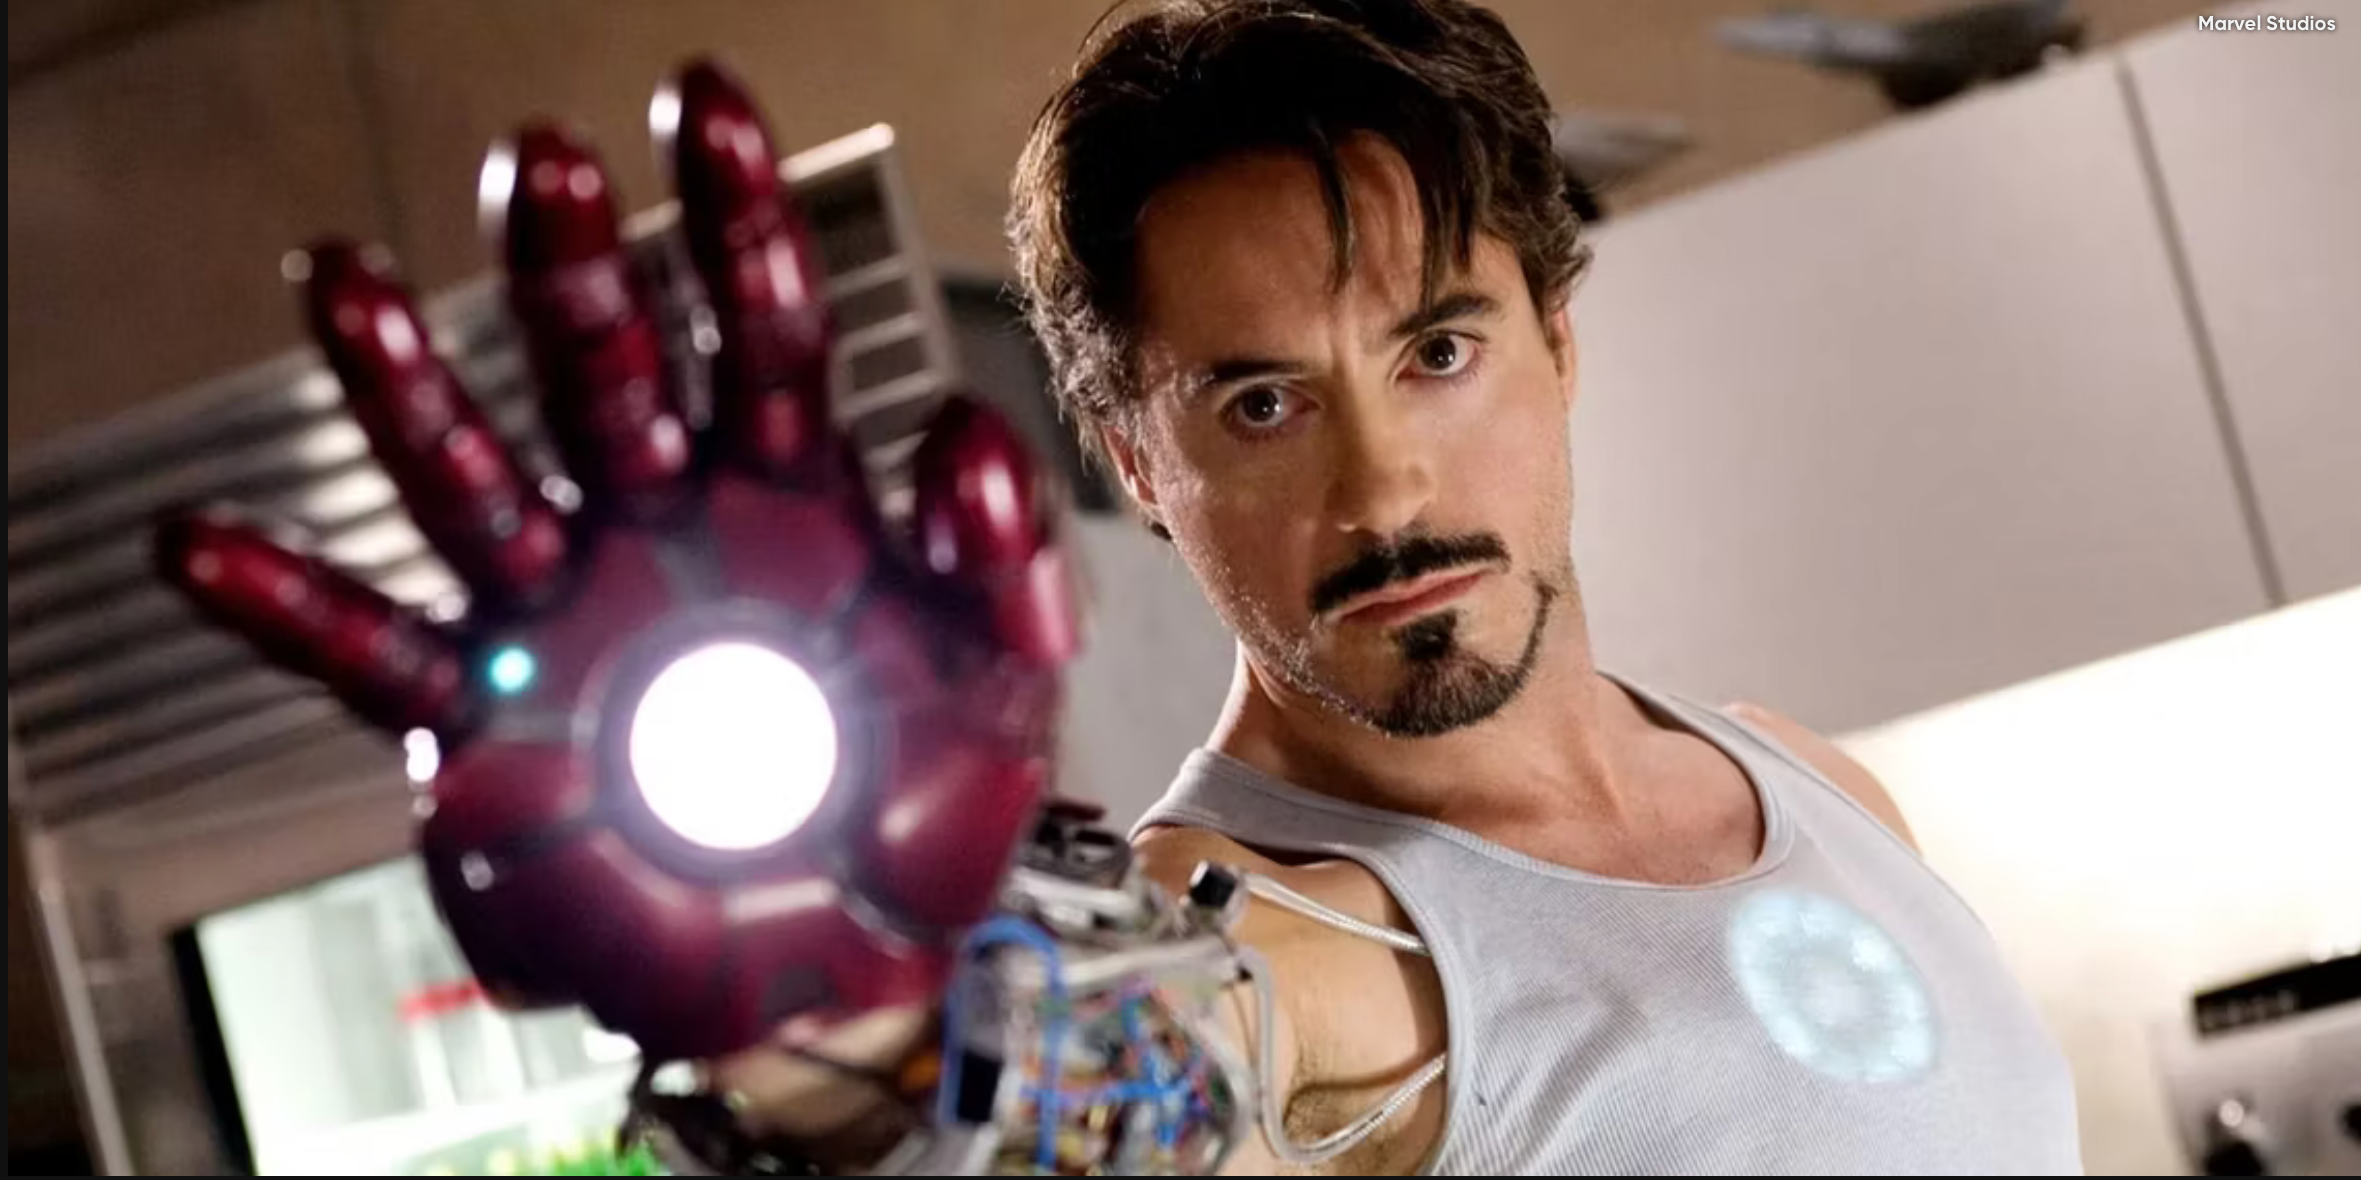 Robert Downey Jr. Says His Opinion on Being Iron Man Changed - 'It Wore Off'